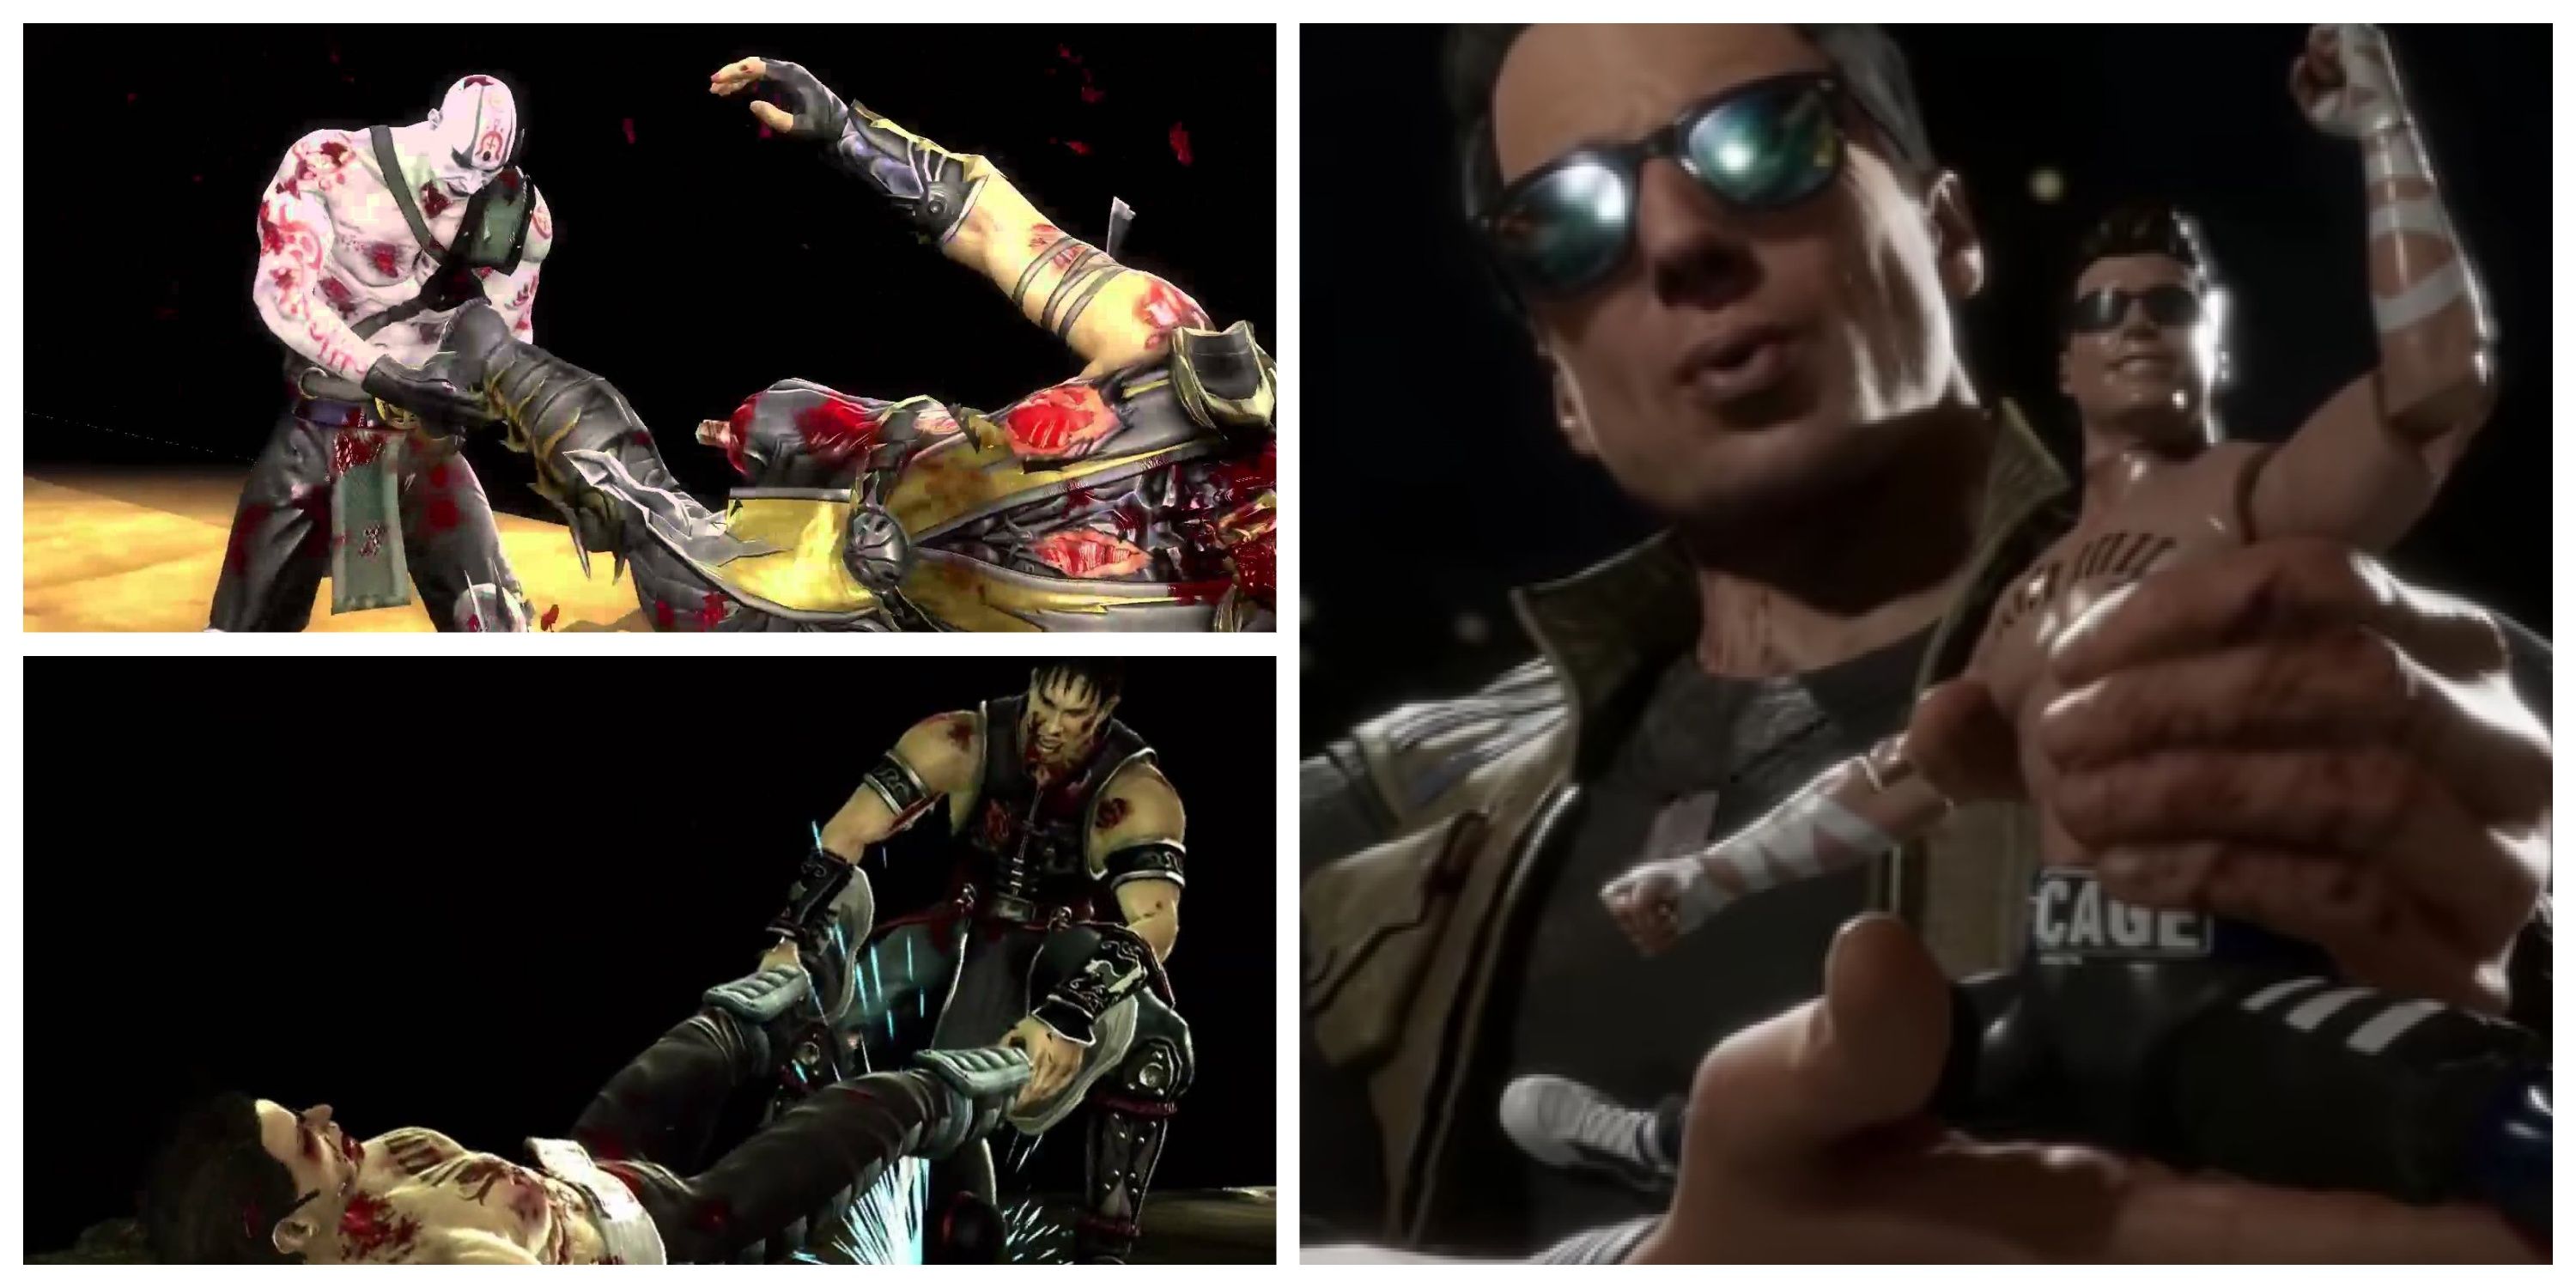 quan chi fatality, kung lao fatality, johnny cage nut shot 